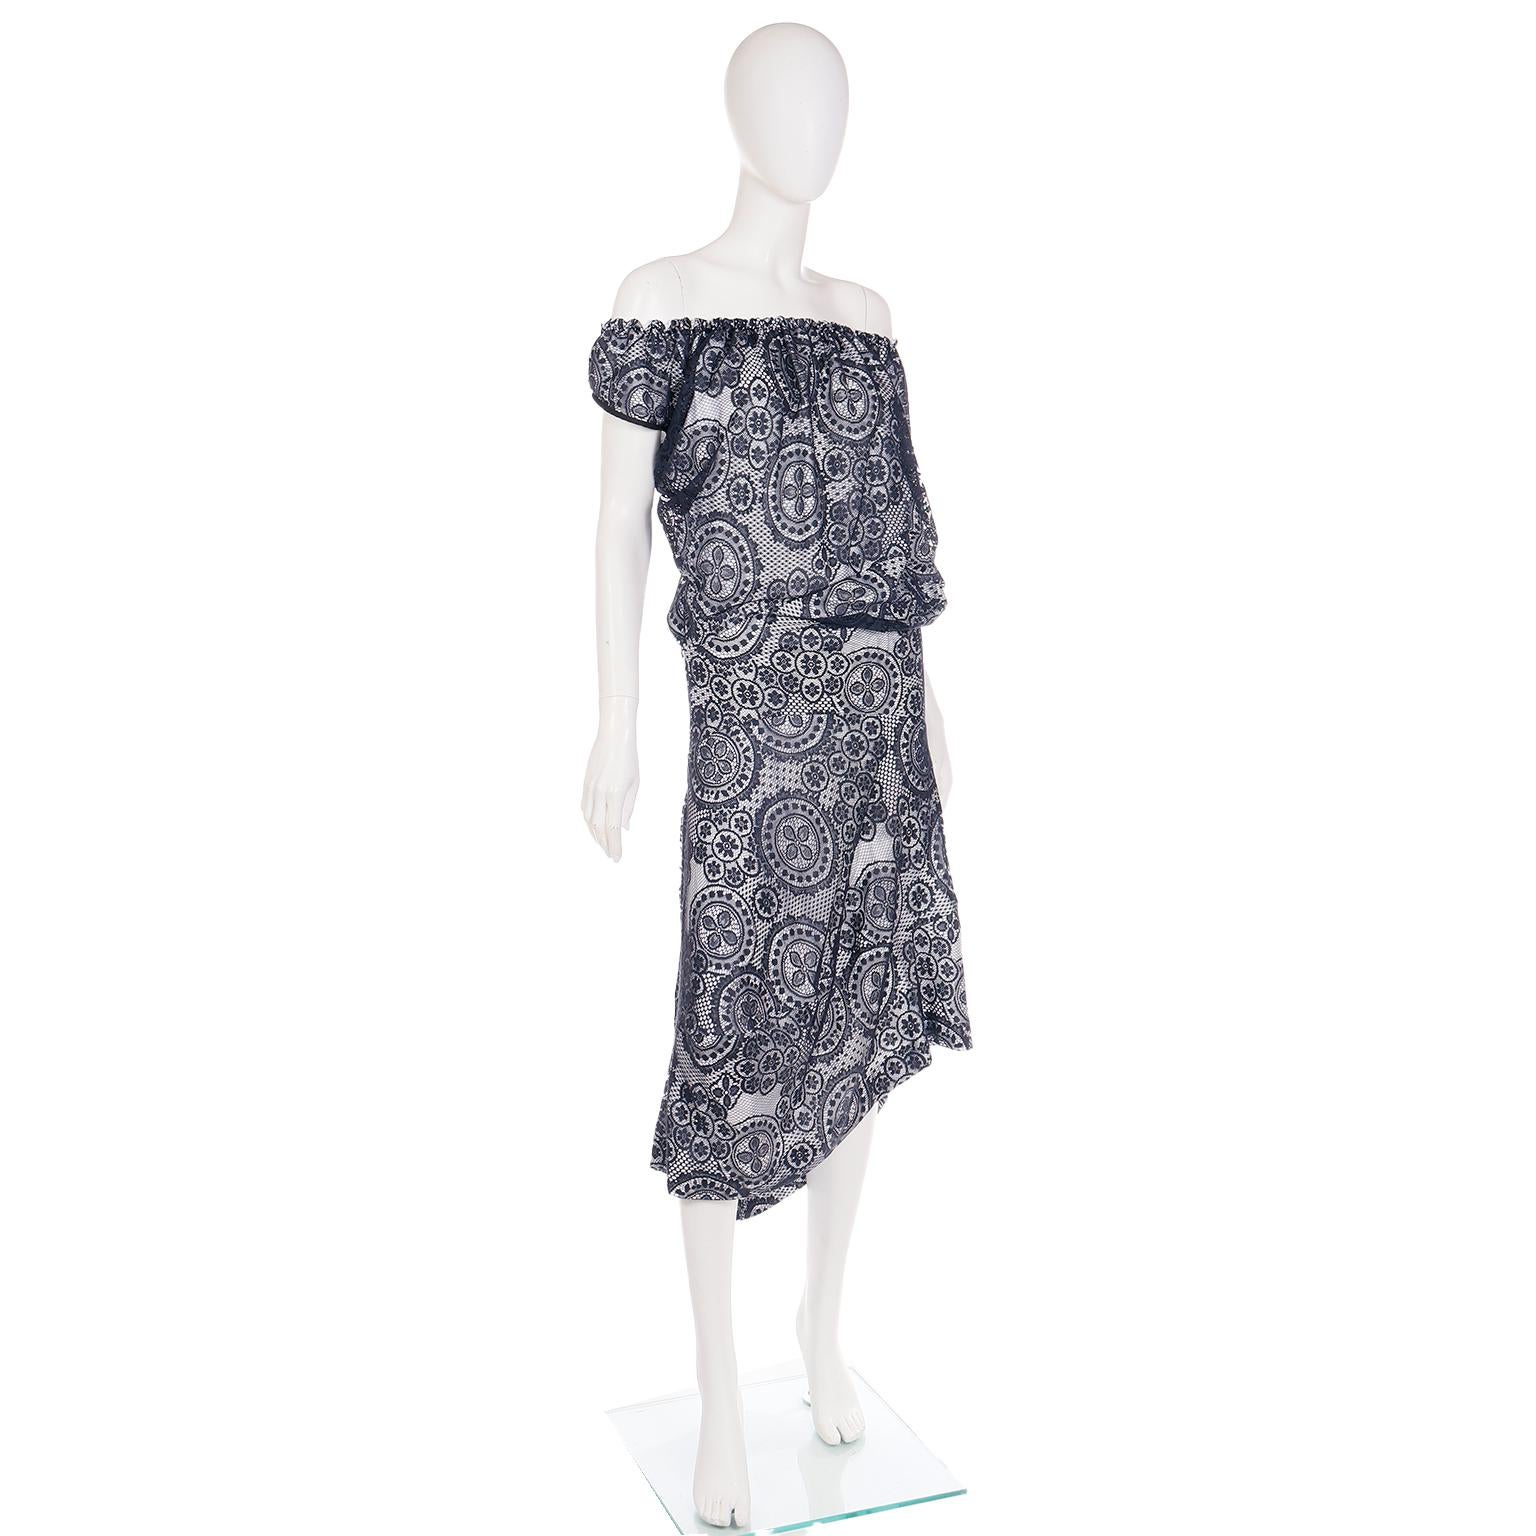 Women's 2012 Vivienne Westwood Red Label Black Lace and White Dress With Drape